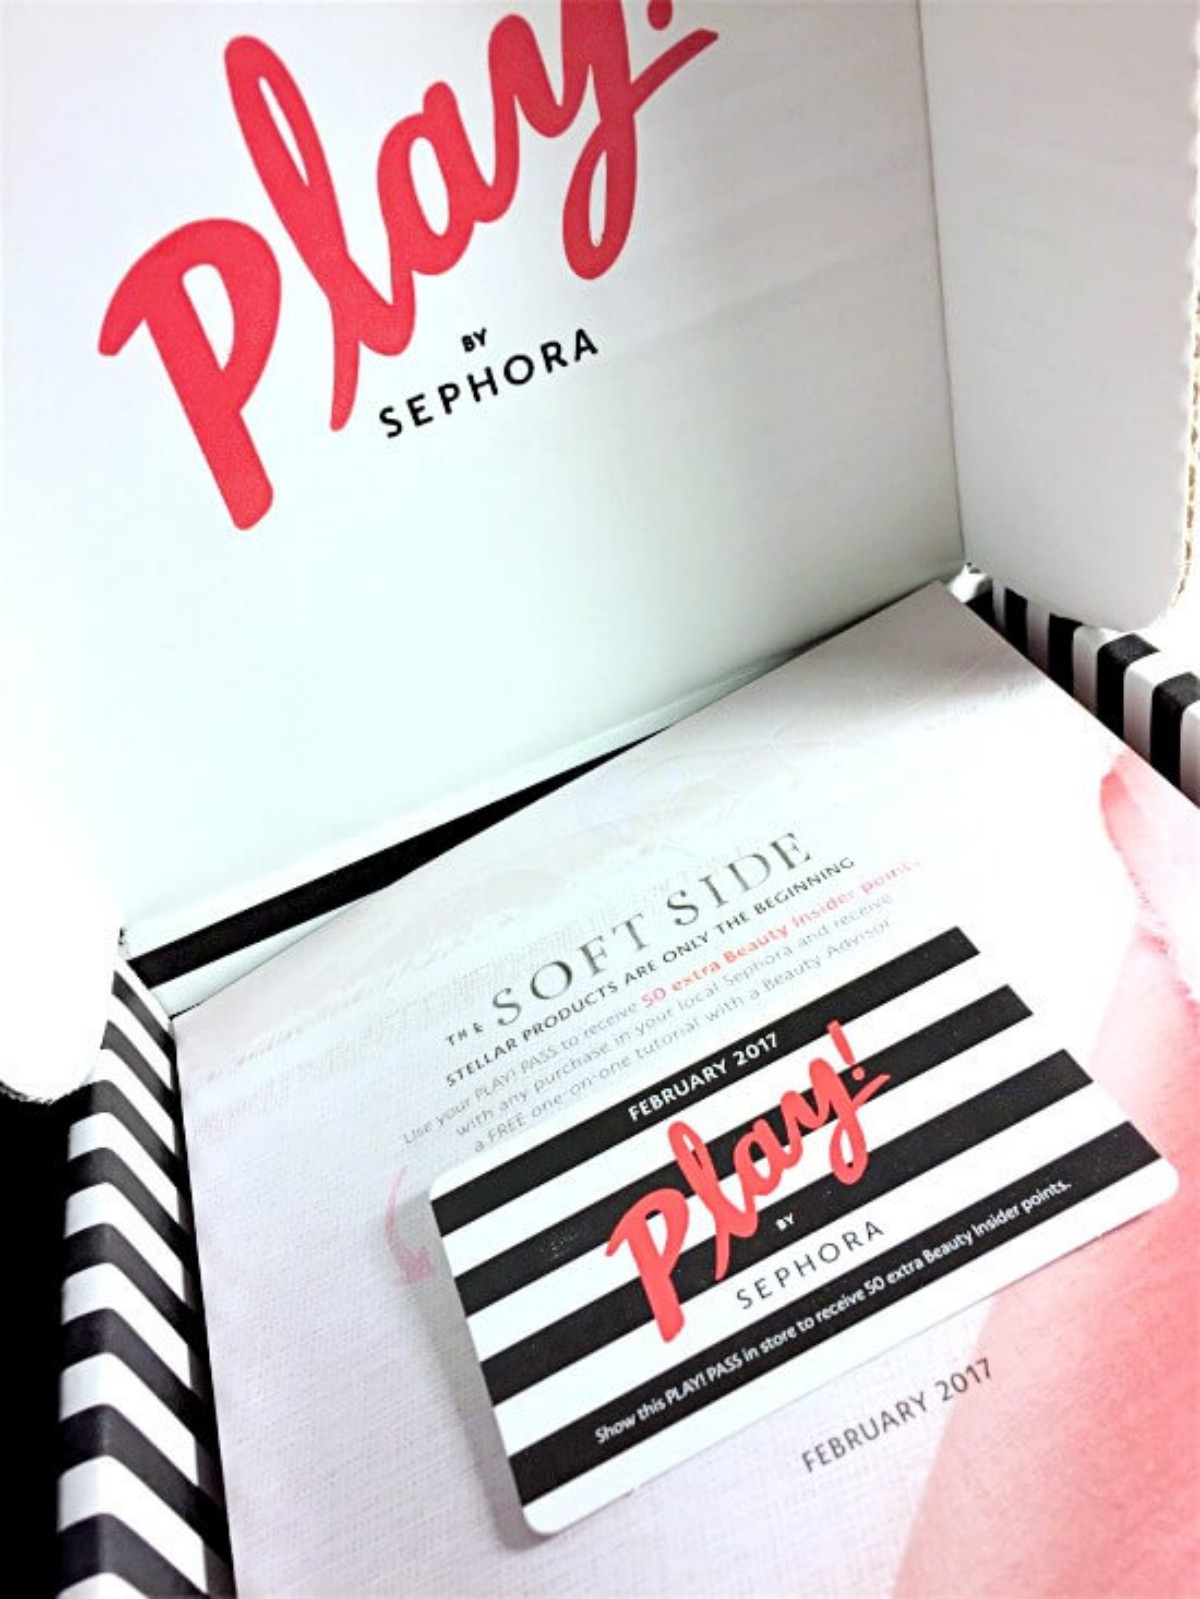 Play! by Sephora February 2017 review